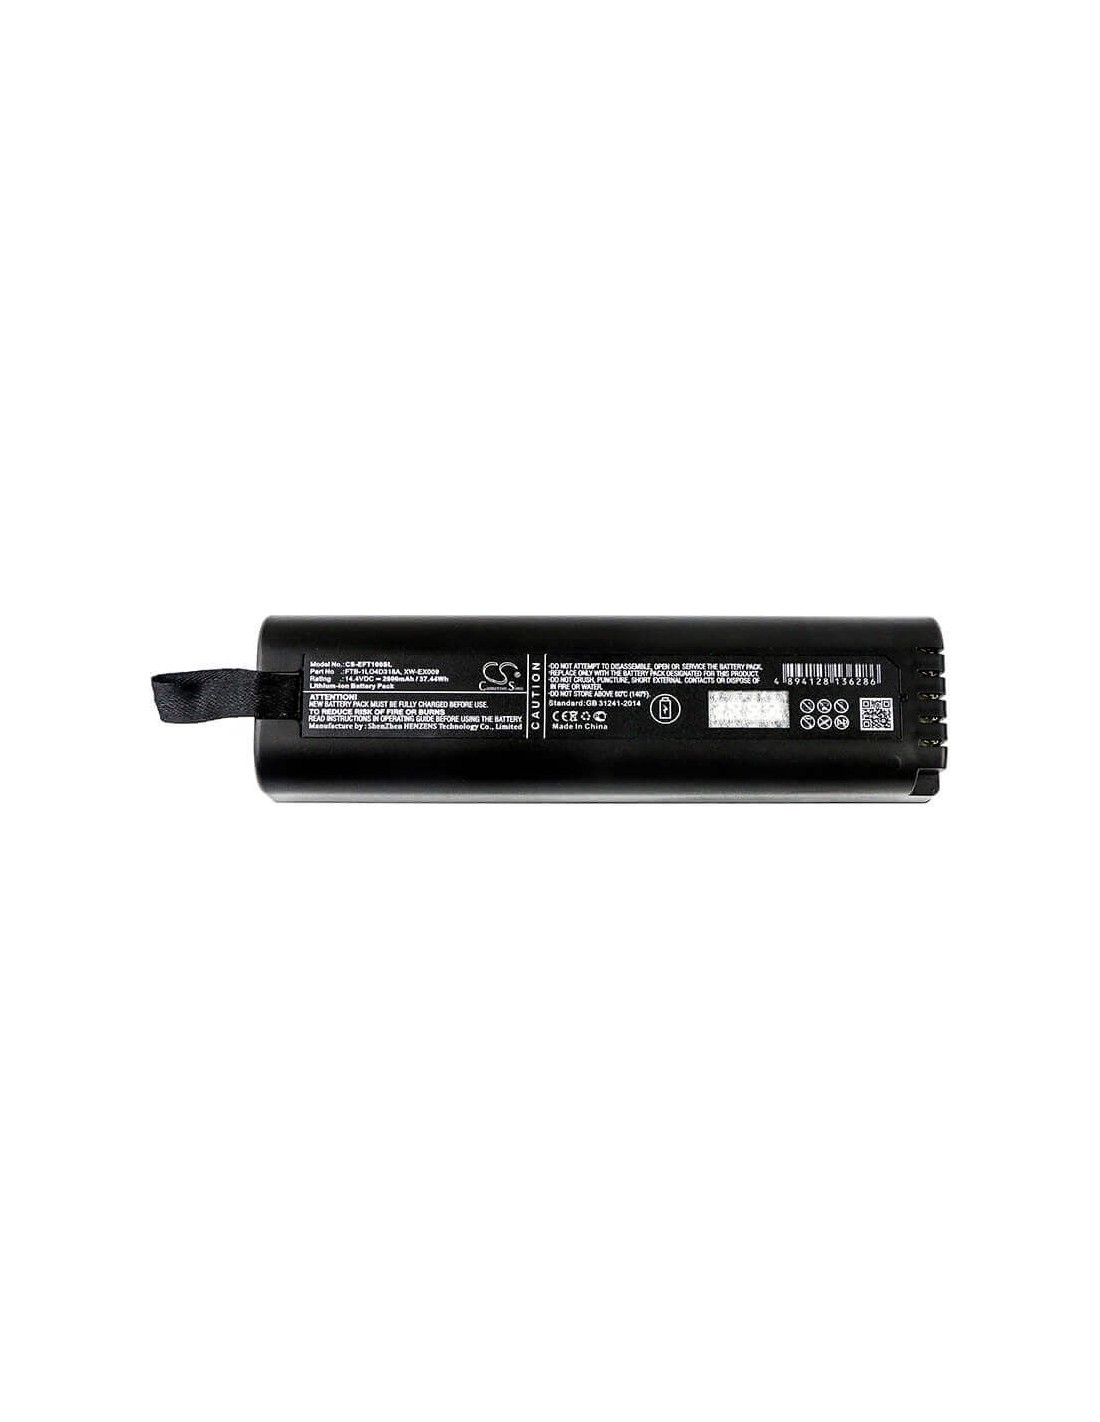 Replacement Battery for Exfo Ftb-1 14.4V, 2600mAh - 37.44Wh